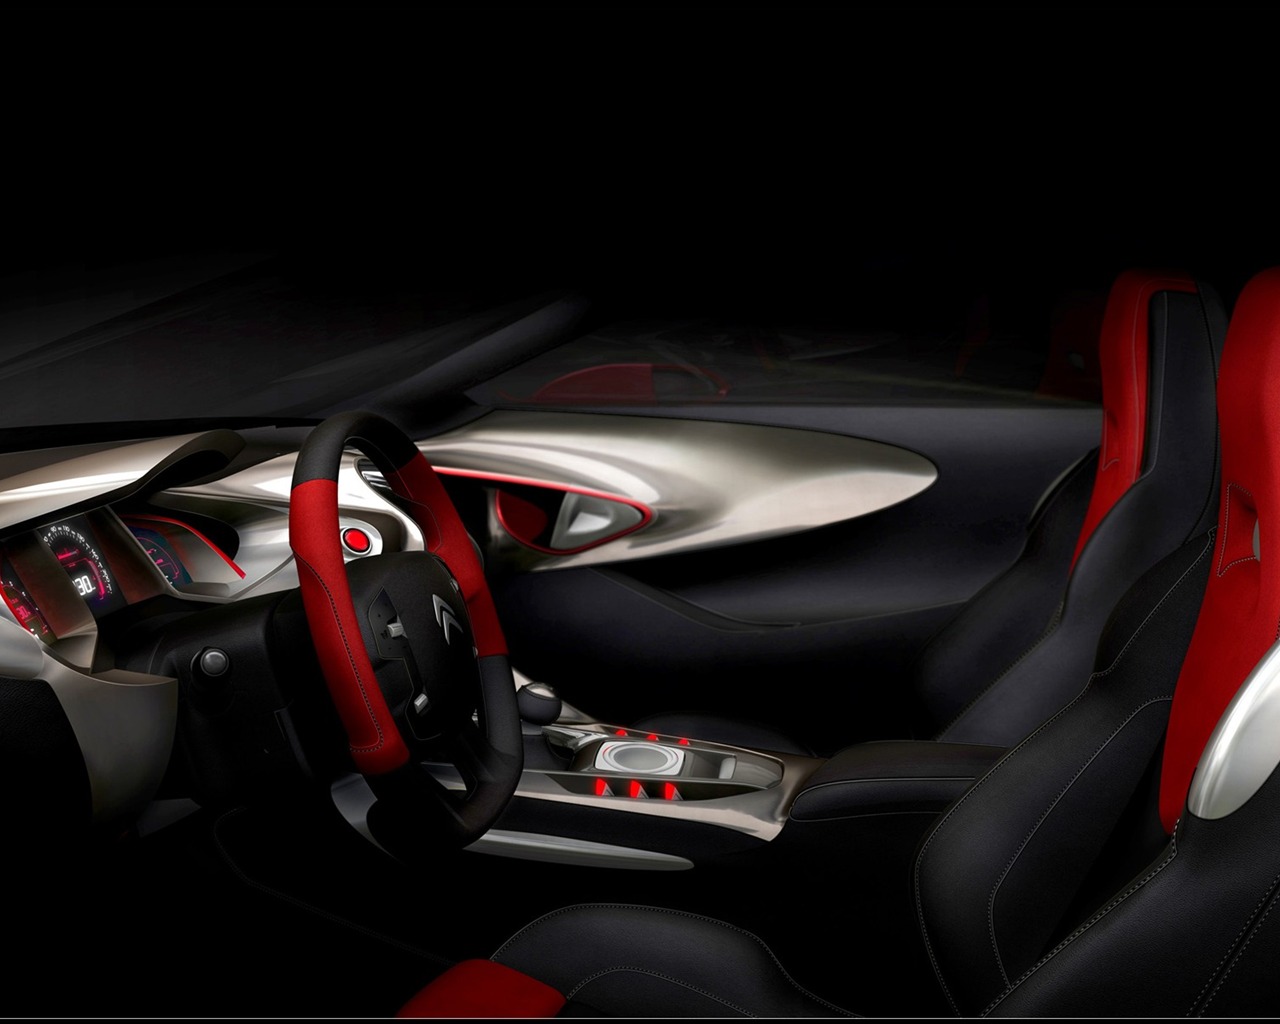 Special edition of concept cars wallpaper (5) #2 - 1280x1024